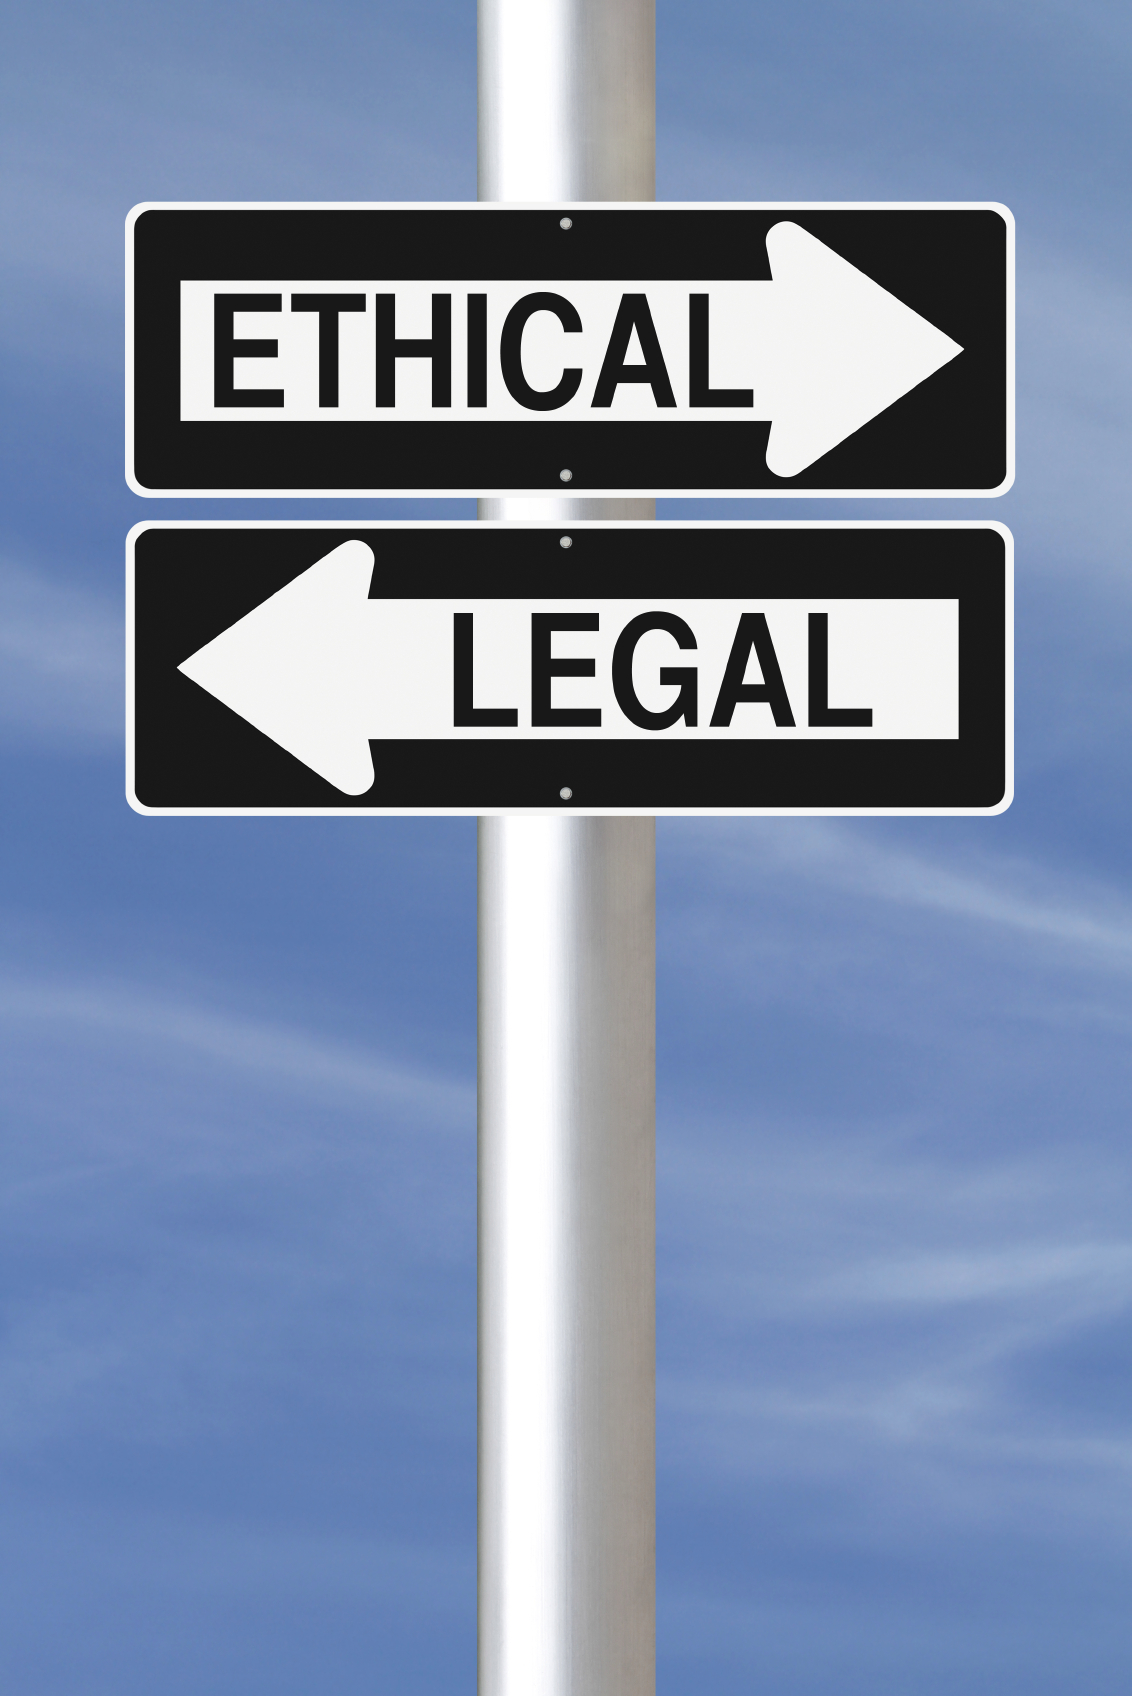 6 Ethical Concepts Legal And Ethical Are Different